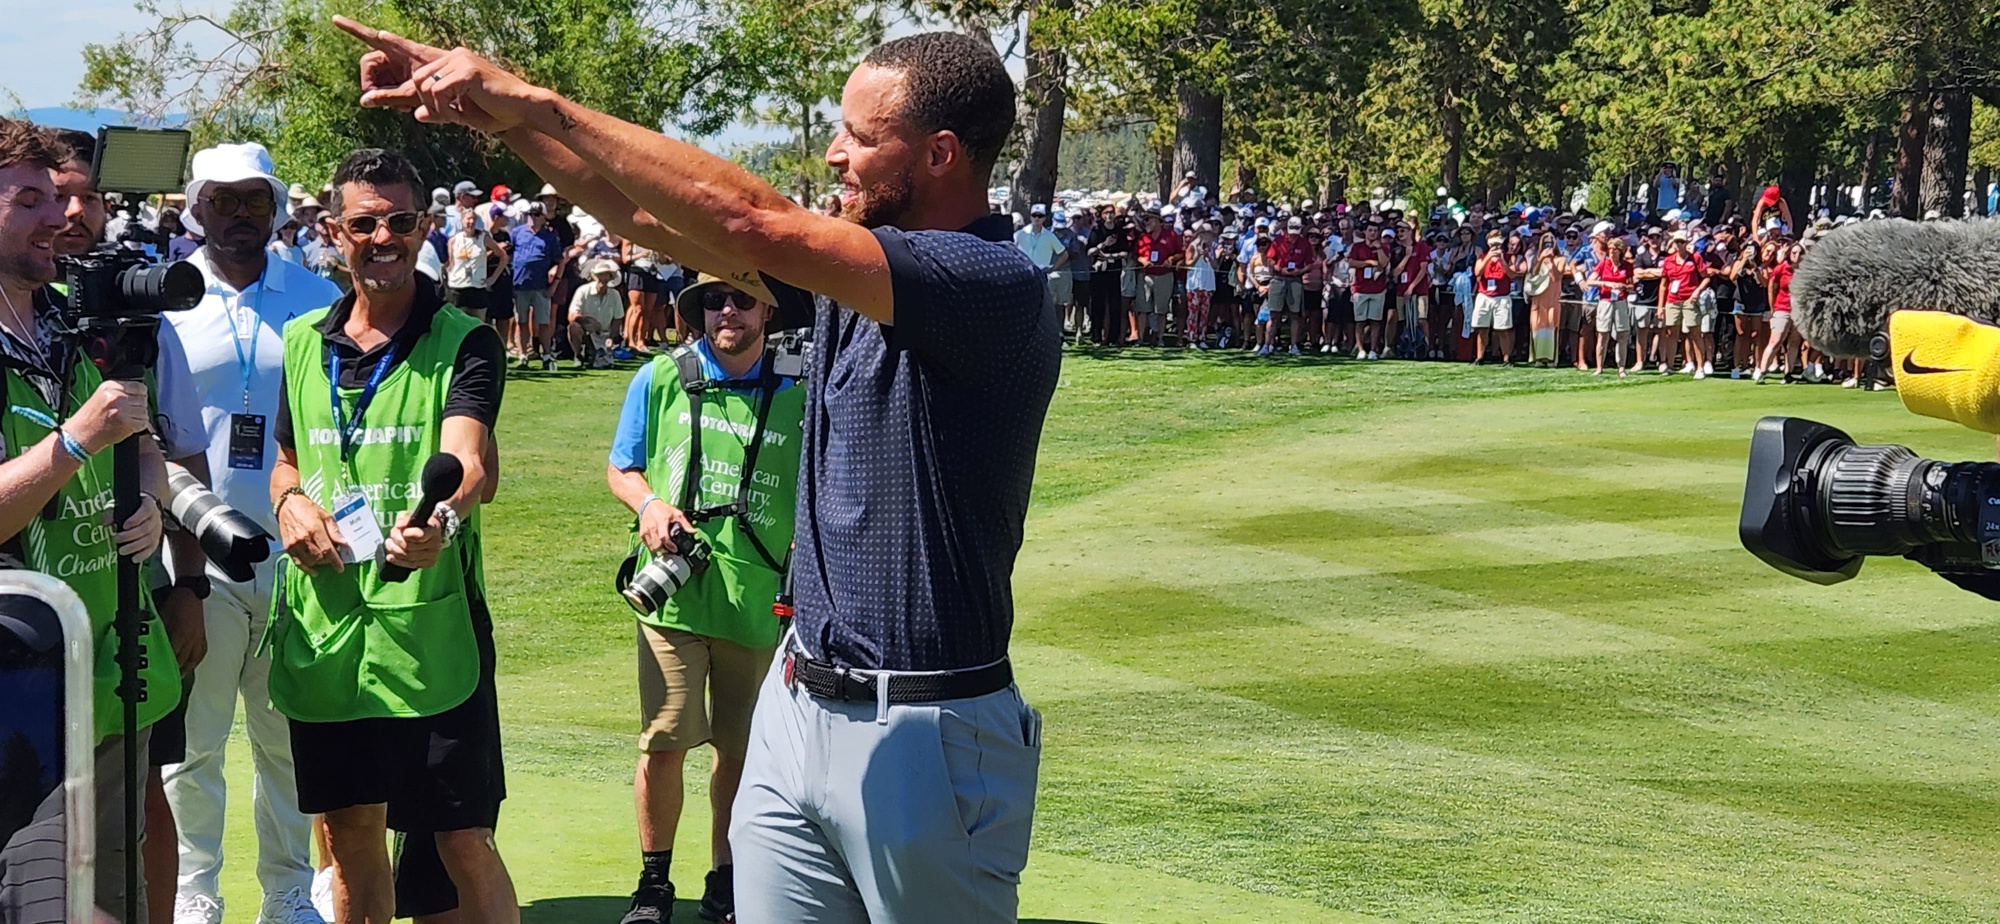 Steph Curry won the American Century Championship celebrity golf tournament on Sunday at Edgewood Tahoe.